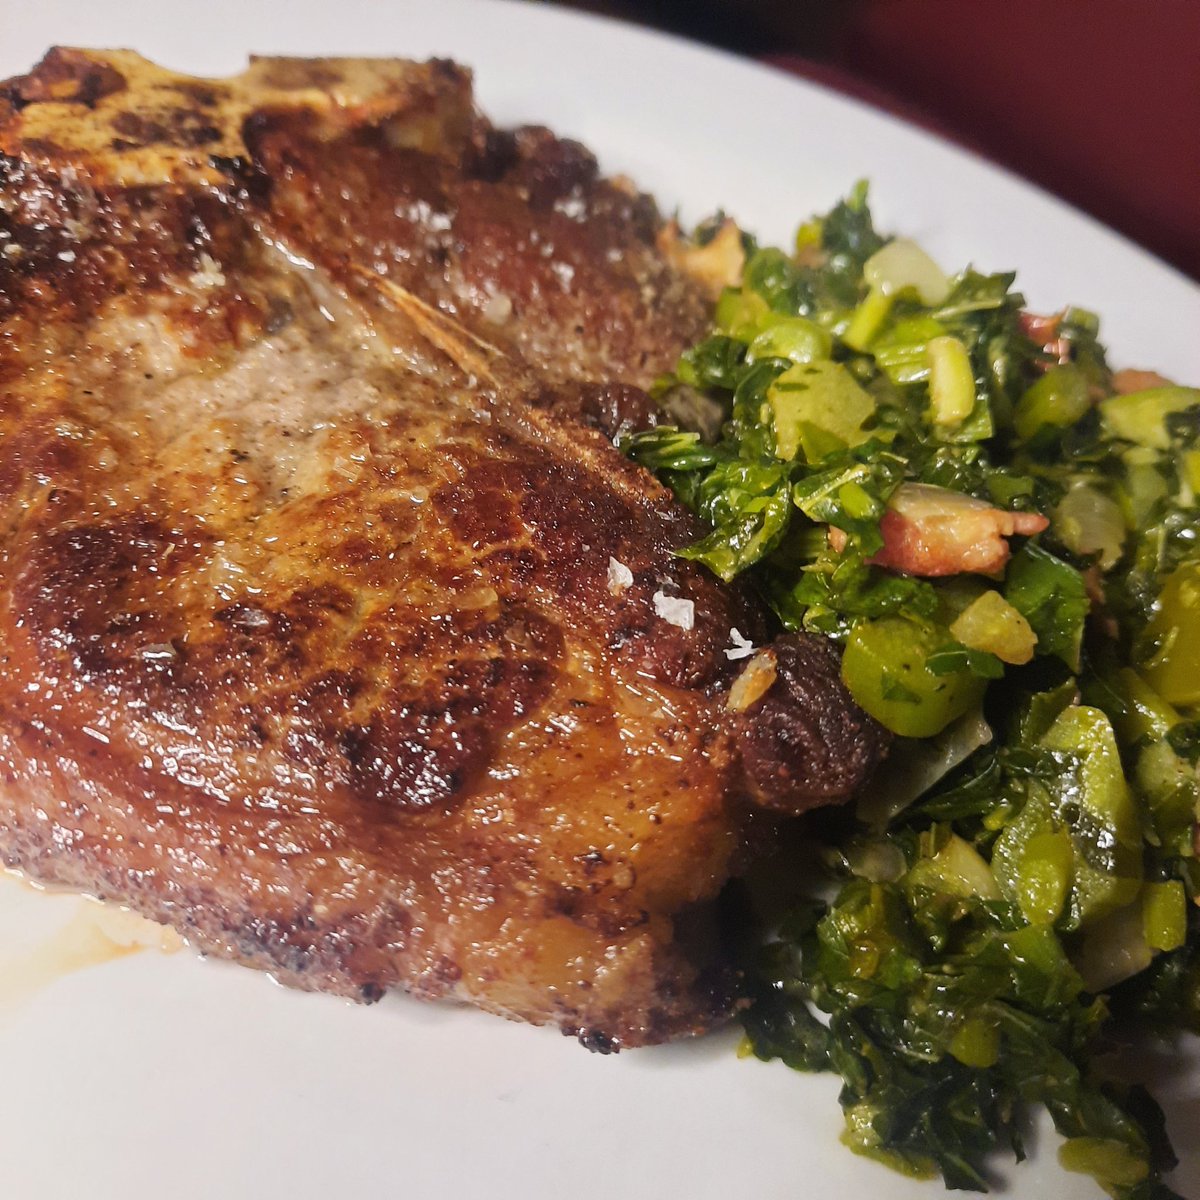 I had 2 of these bad boys: T-bone steaks
With creamy callaoo & bacon.
Today ended up being an #OMAD day, and I'm not mad about it.

#keto #wholefood #meatheals #ketoJamaican #ketoJamaicastyle